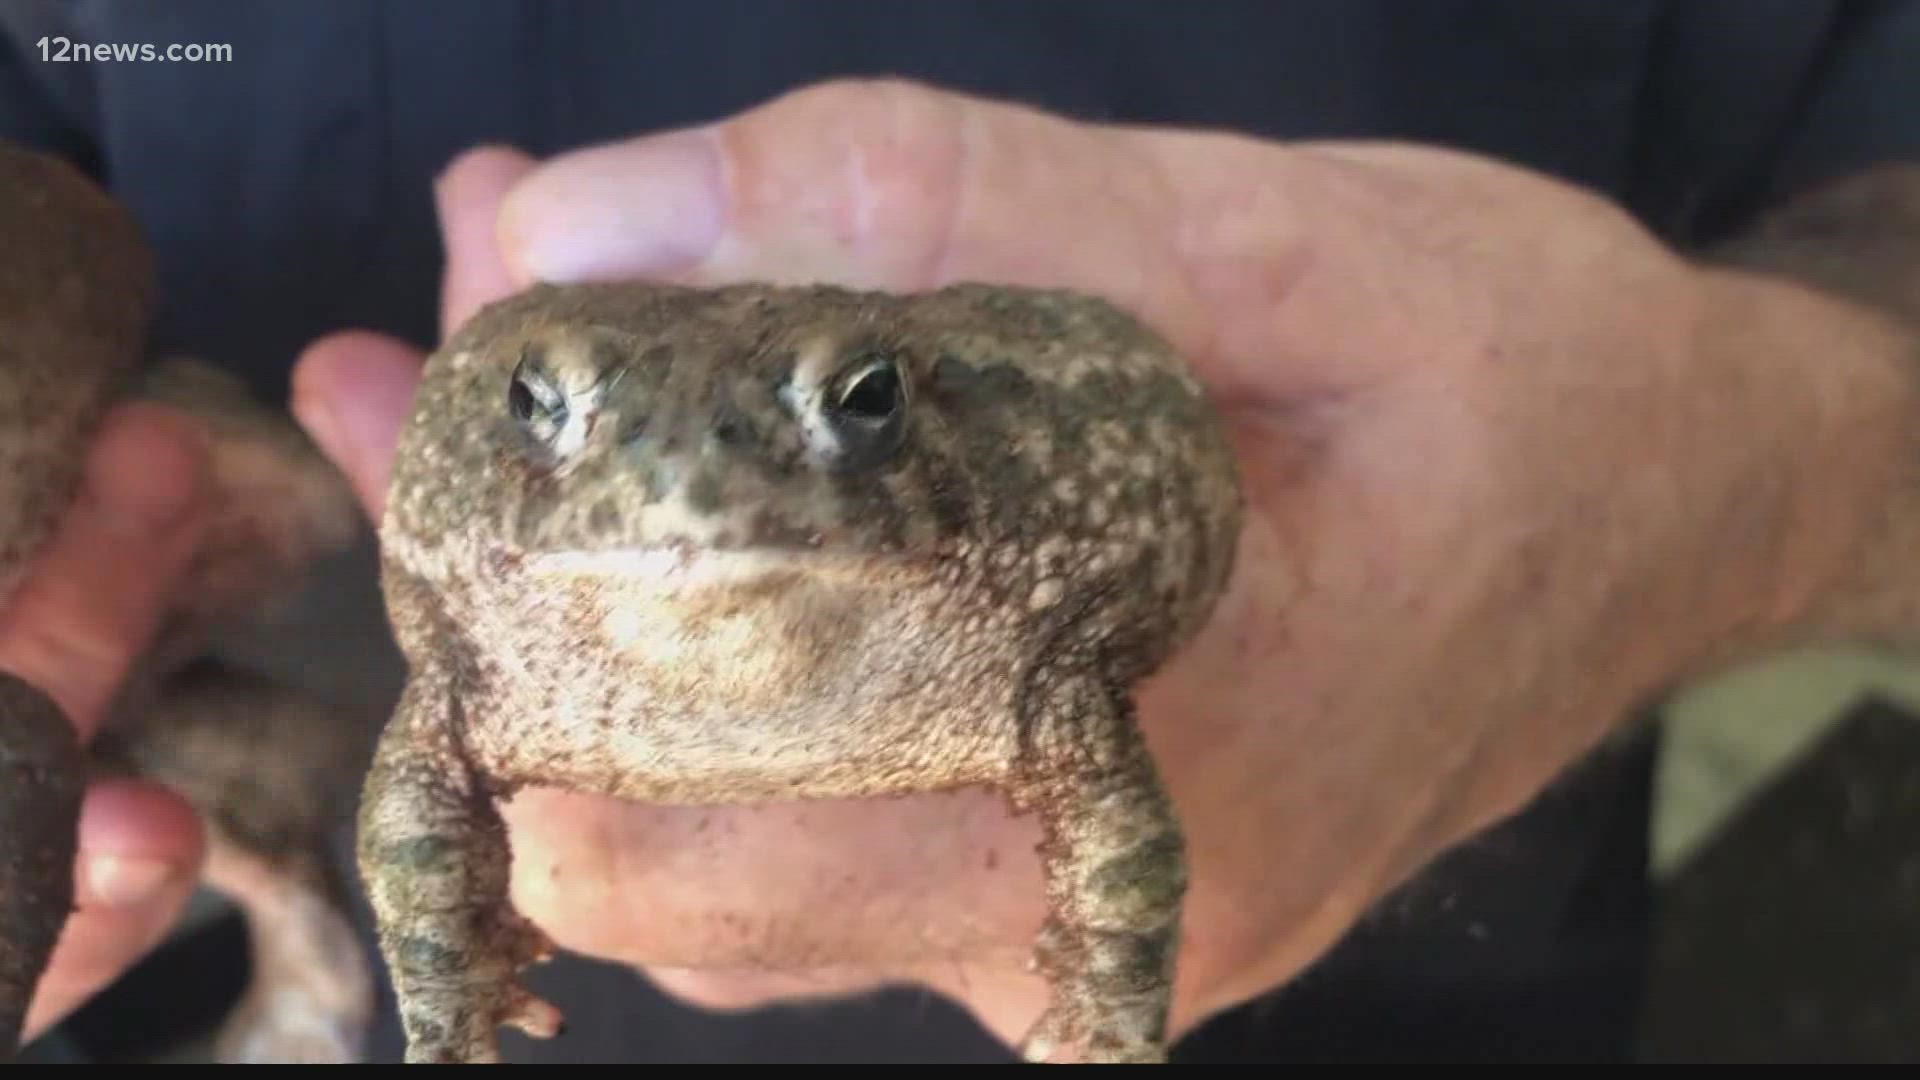 Sonoran Desert toads are also becoming more common after weeks of heavy rain. Dogs, in particular, may become curious and try to eat the toxic toads, doctors warn.